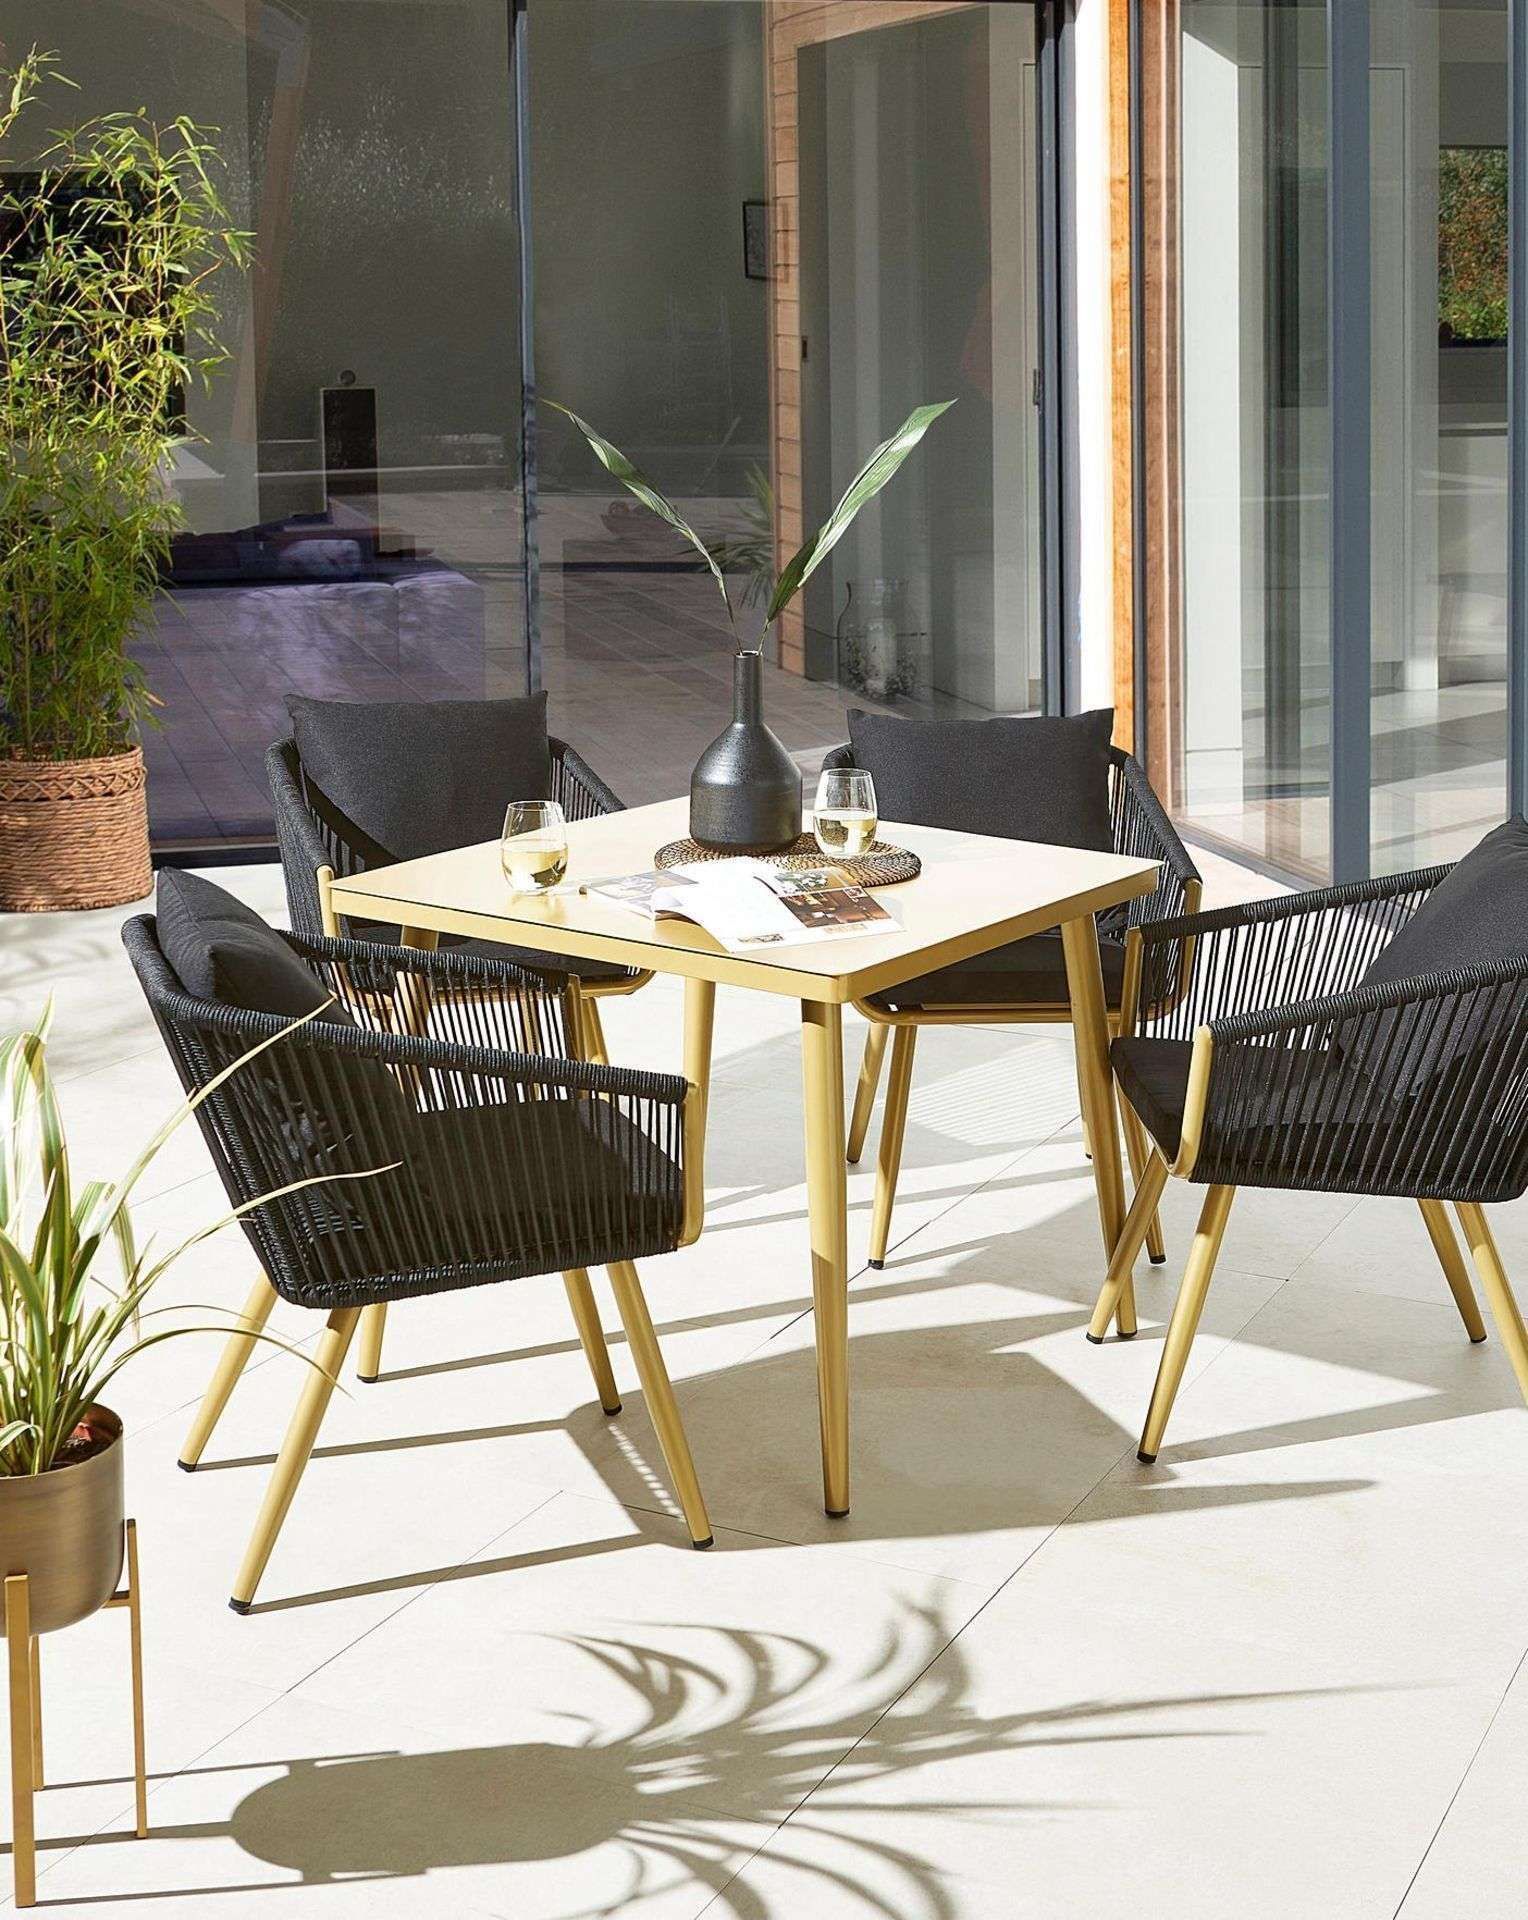 Trade Lot 4 x New & Packaged Joanna Hope Naya 4 Seater Dining Sets. RRP £719 each. This Exclusive